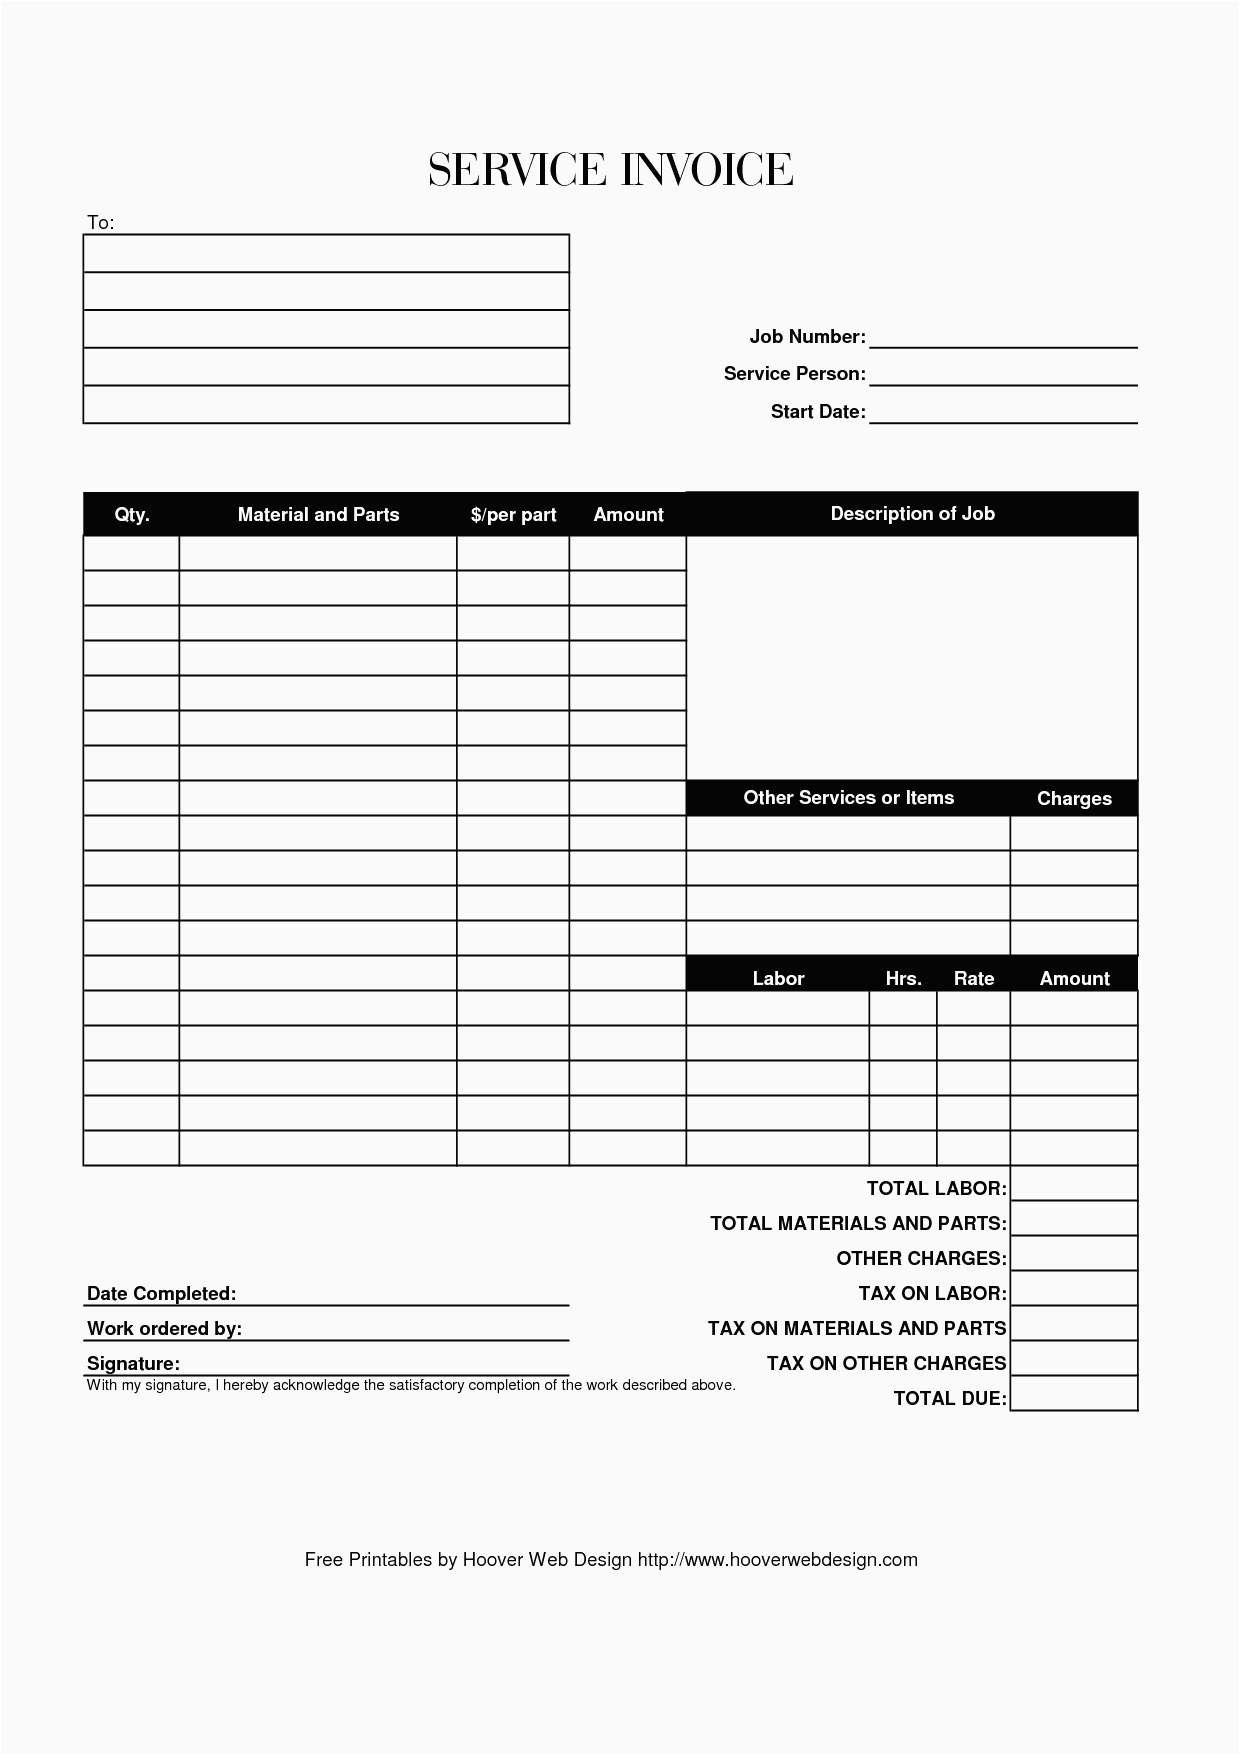 Free Printable Service Invoice Forms – Kobcarbamazepi.website - Free Printable Out Of Service Sign